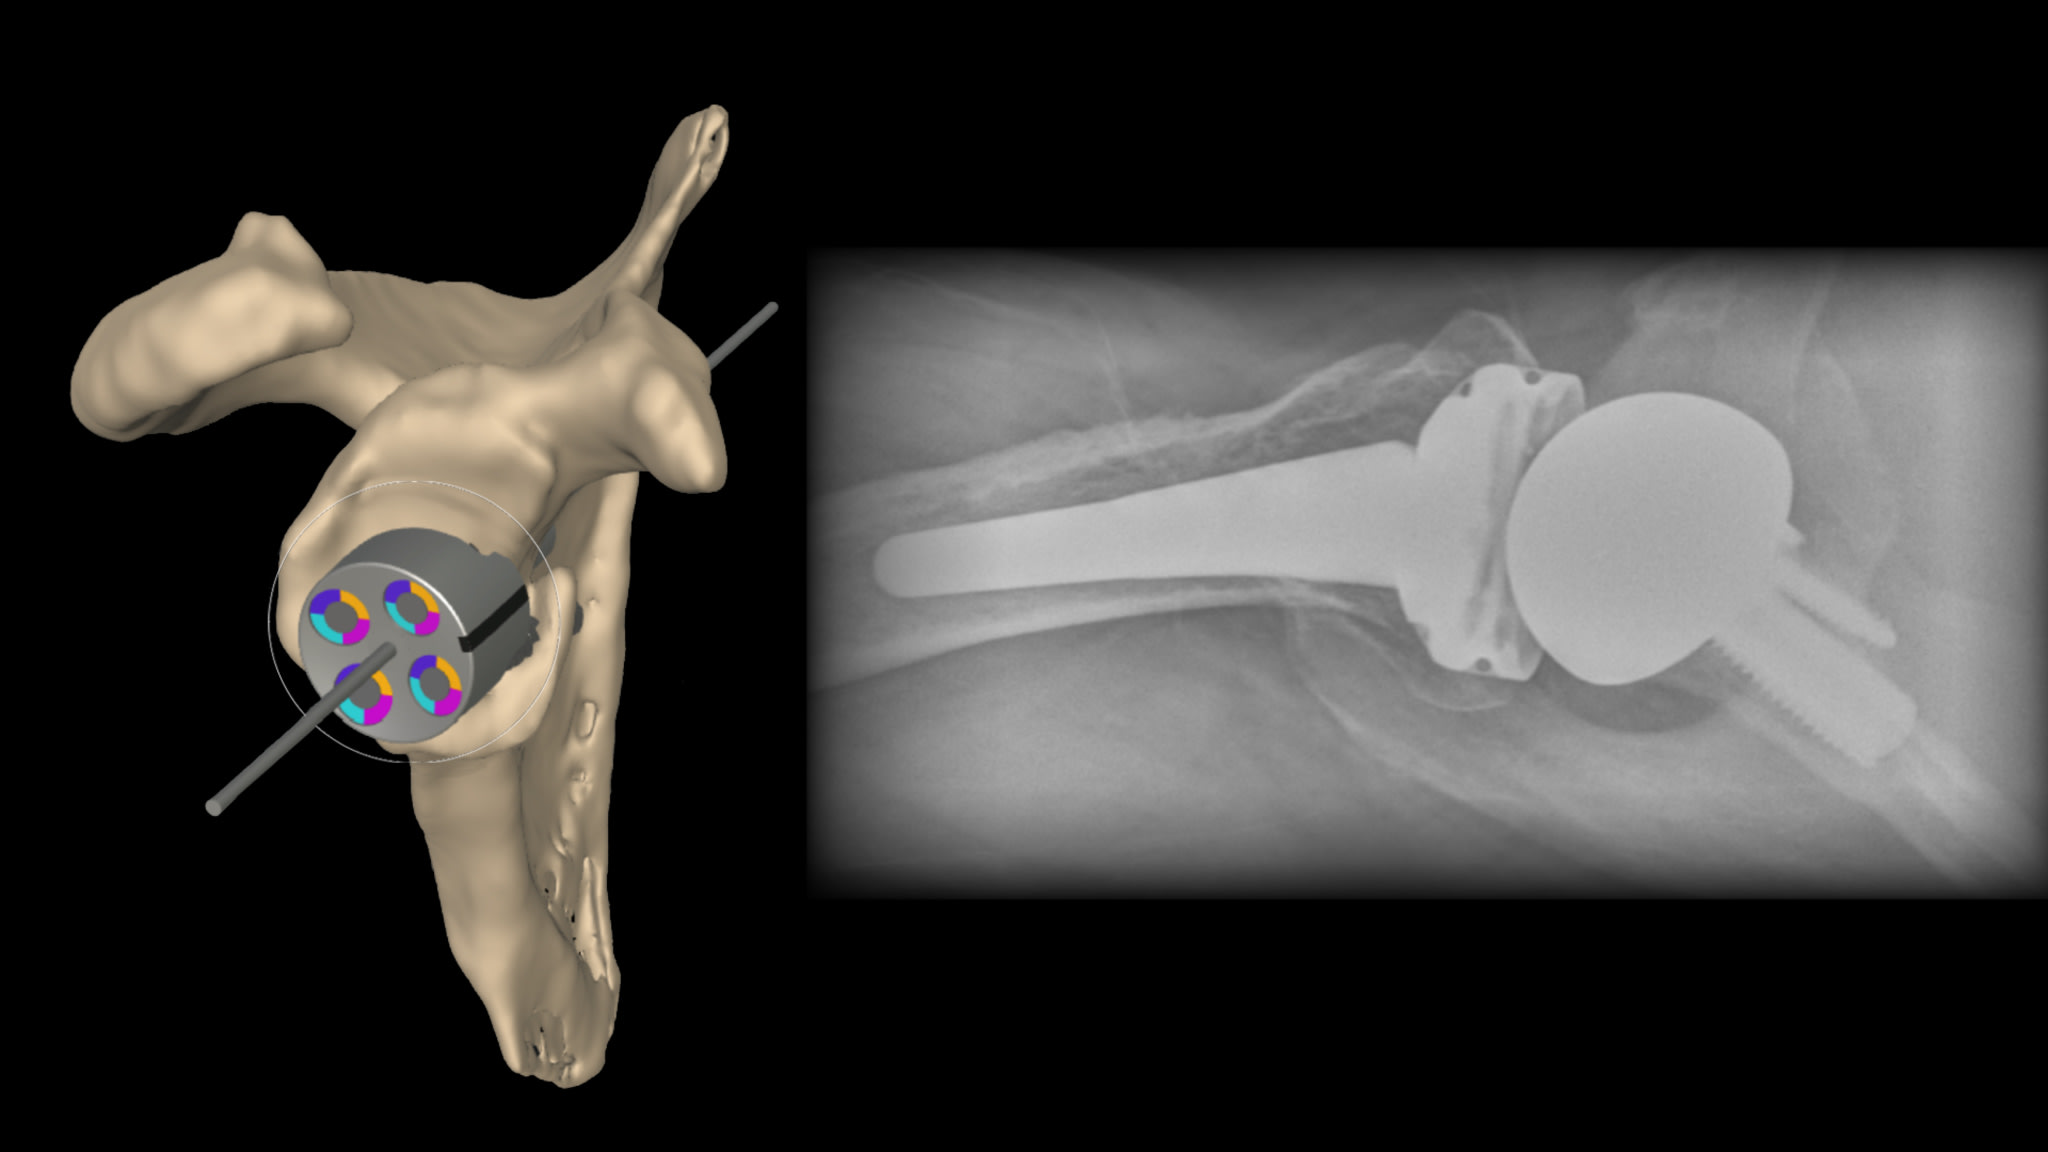 Managing Anterior Glenoid Bone Loss With the Univers Revers™ Augmented Modular Glenoid System (MGS)